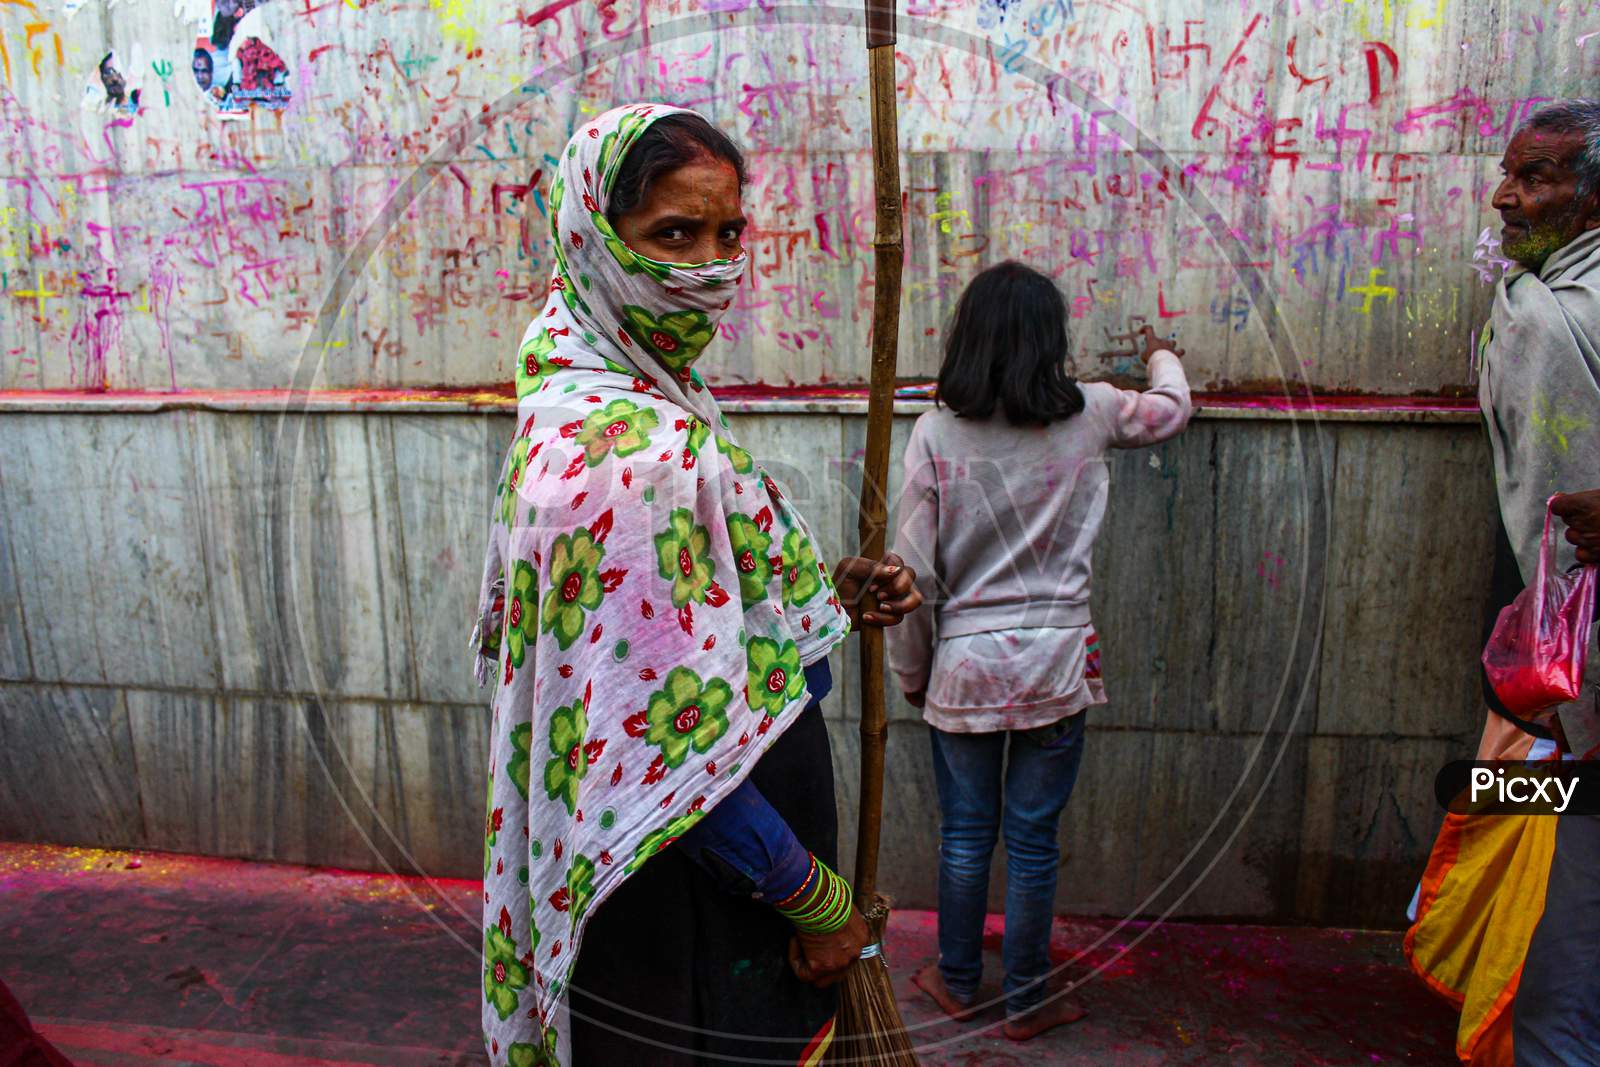 Mathura, Uttar Pradesh, India- January 6 2020: A Female Worker With Her Face Covered With A Cloth Cleaning The Temple Of Nandgaon During The Celebration Of Holi.